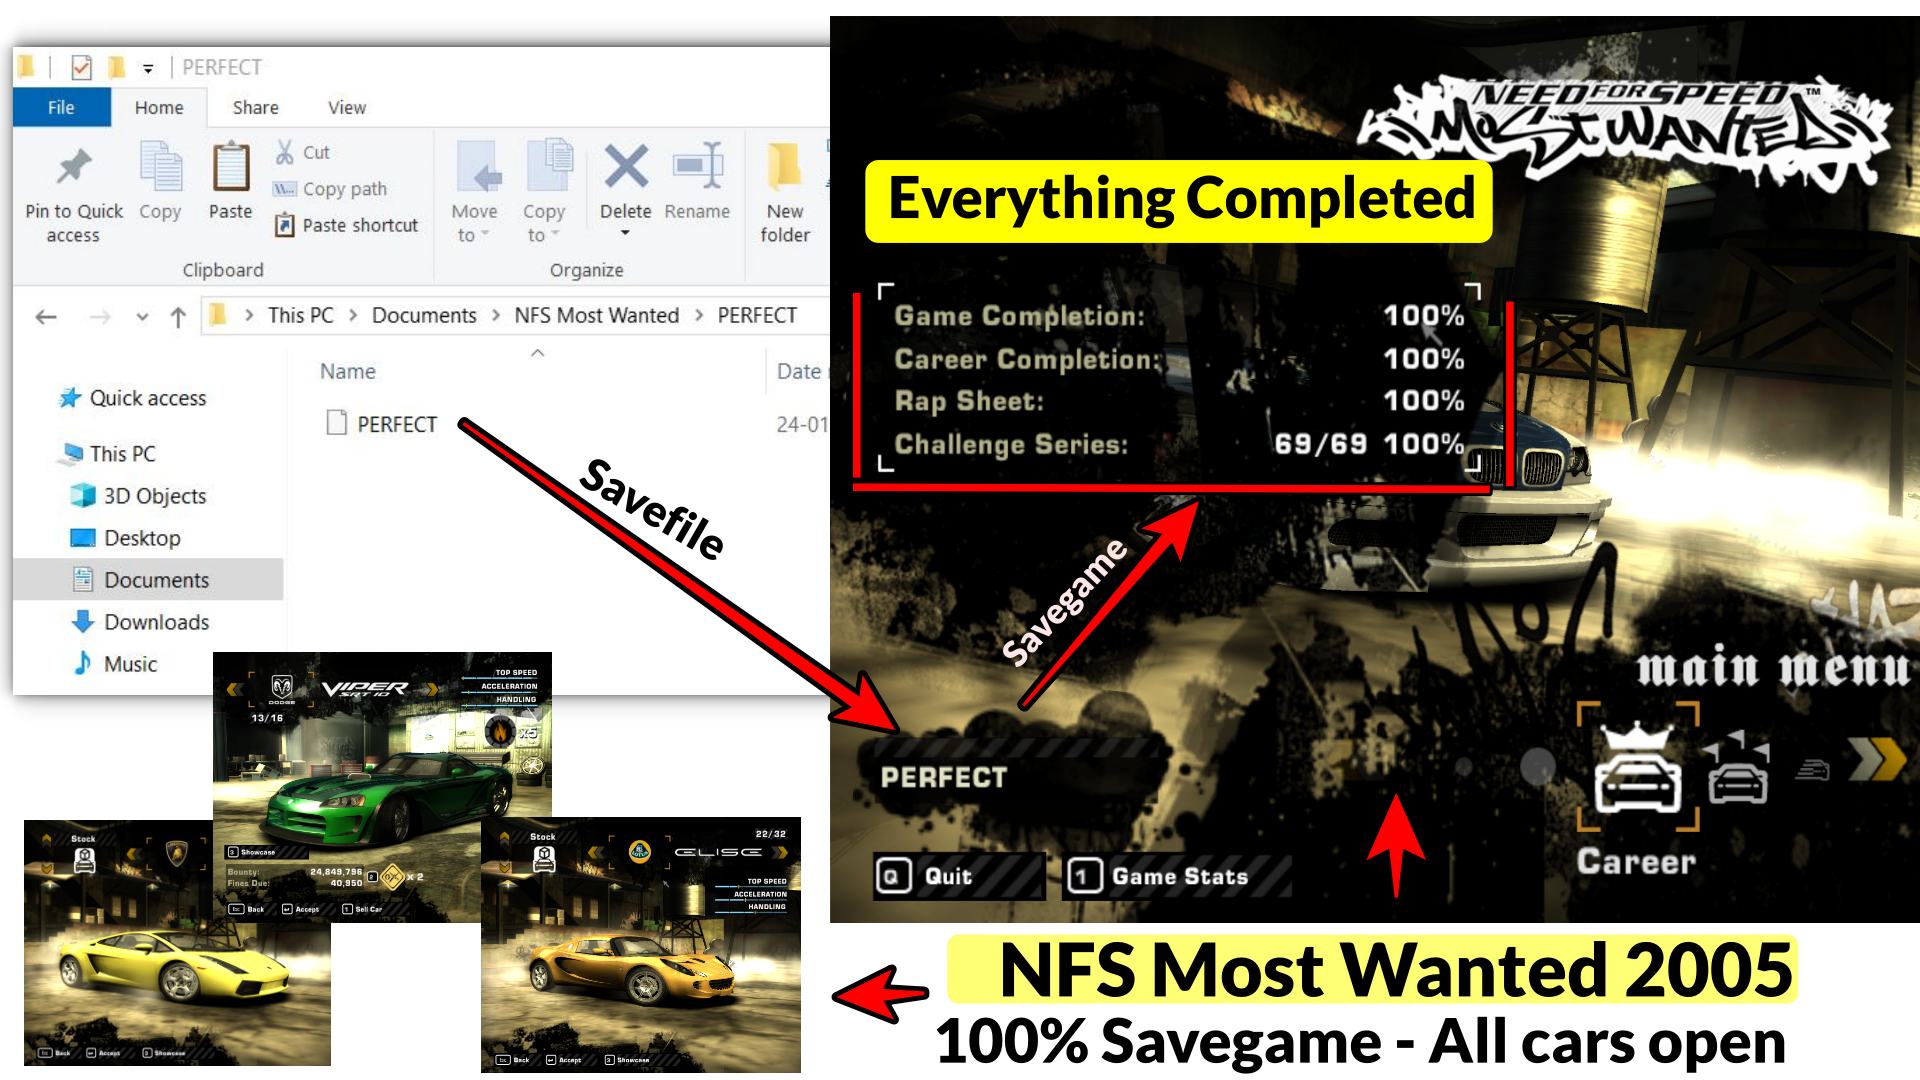 NFS Most Wanted 2005 PC- 100% Savegame - All cars unlocked